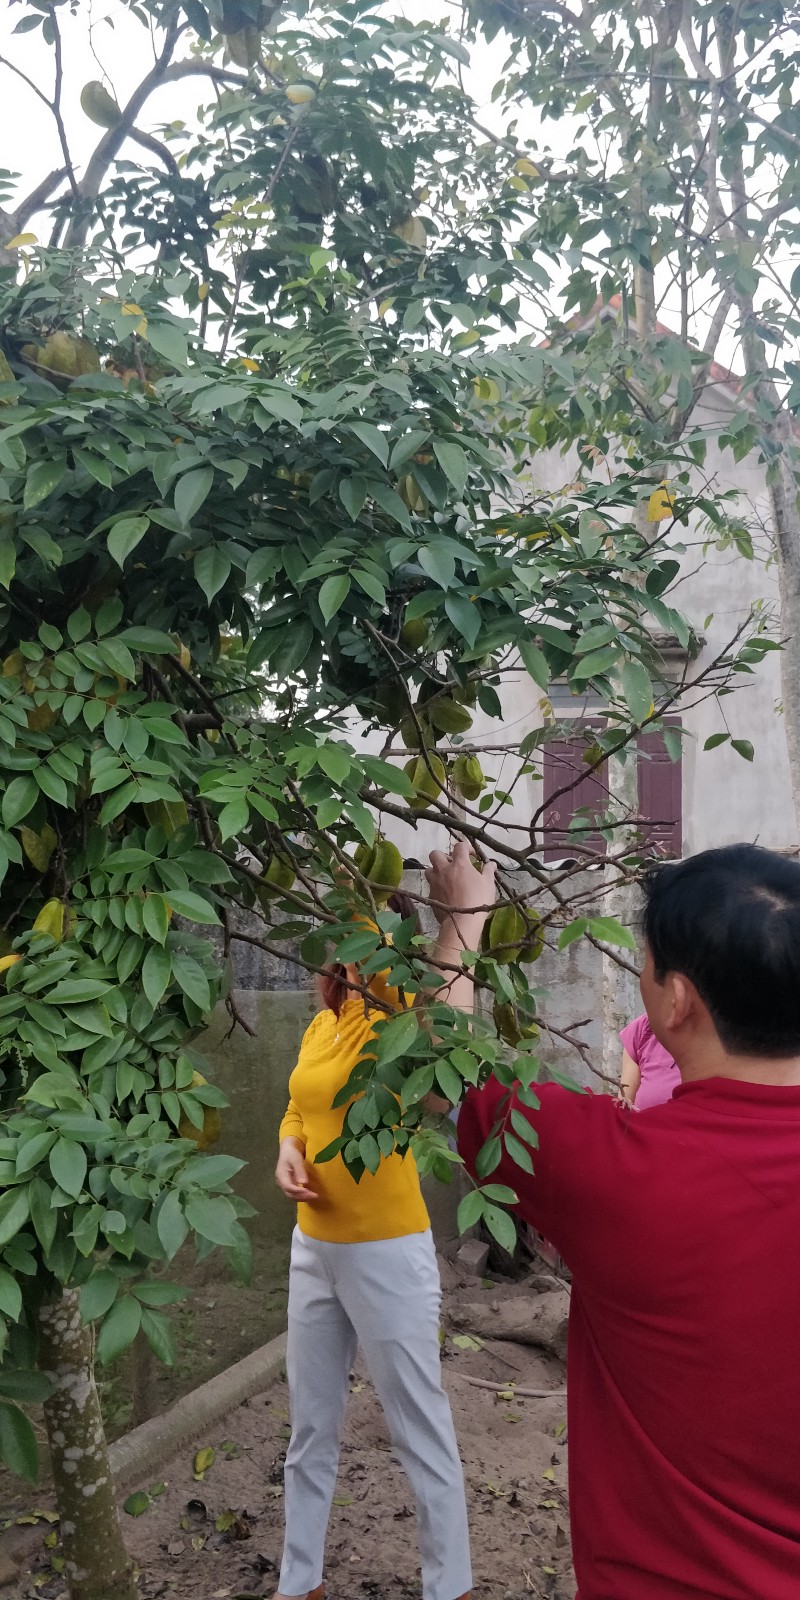 Star fruit tree at a friend’s home